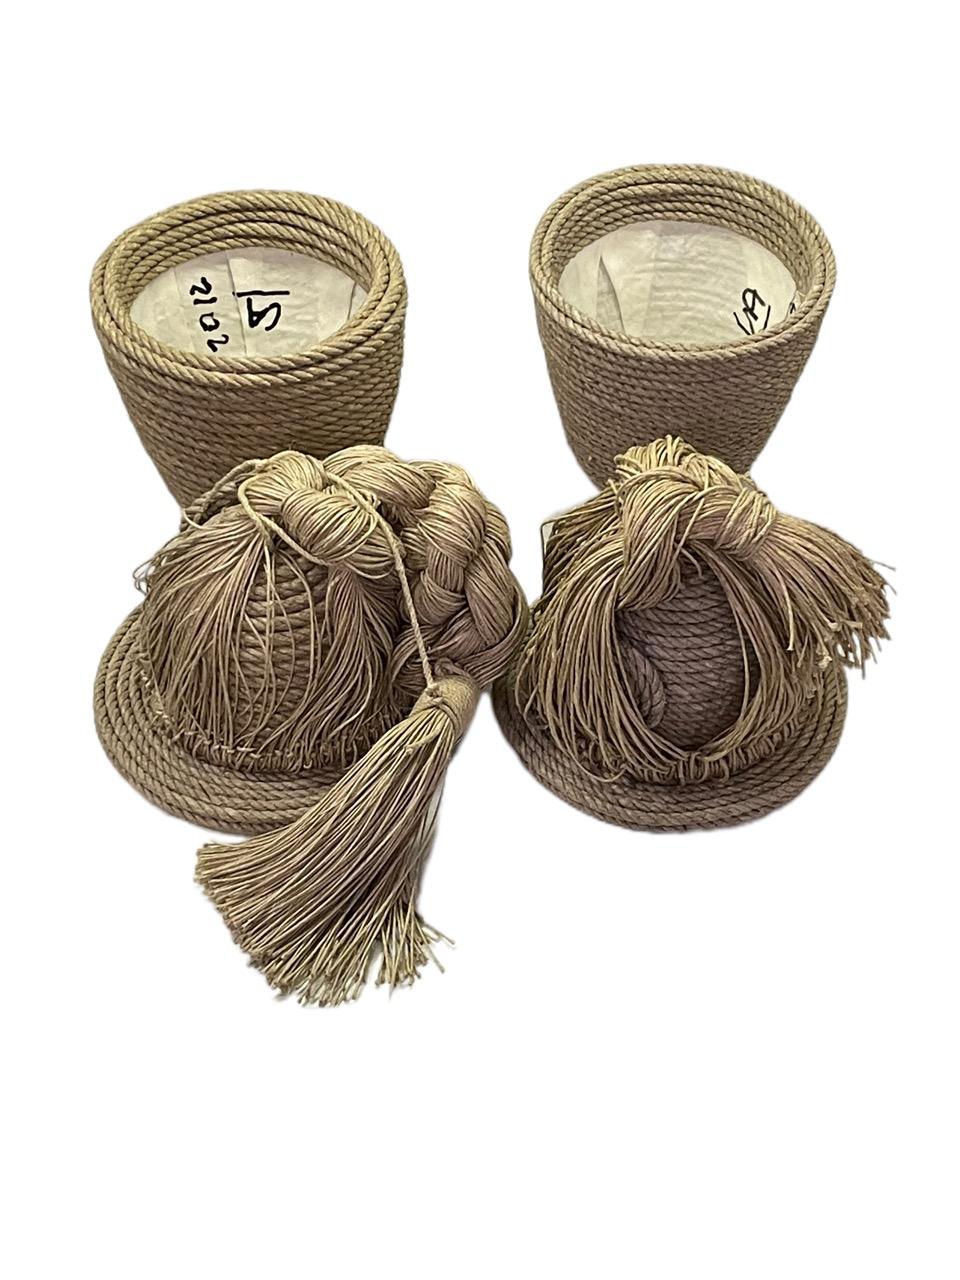 Modern Pair of Contemporary 21st Century French Christian Astuguevieille Jute Rope Co For Sale